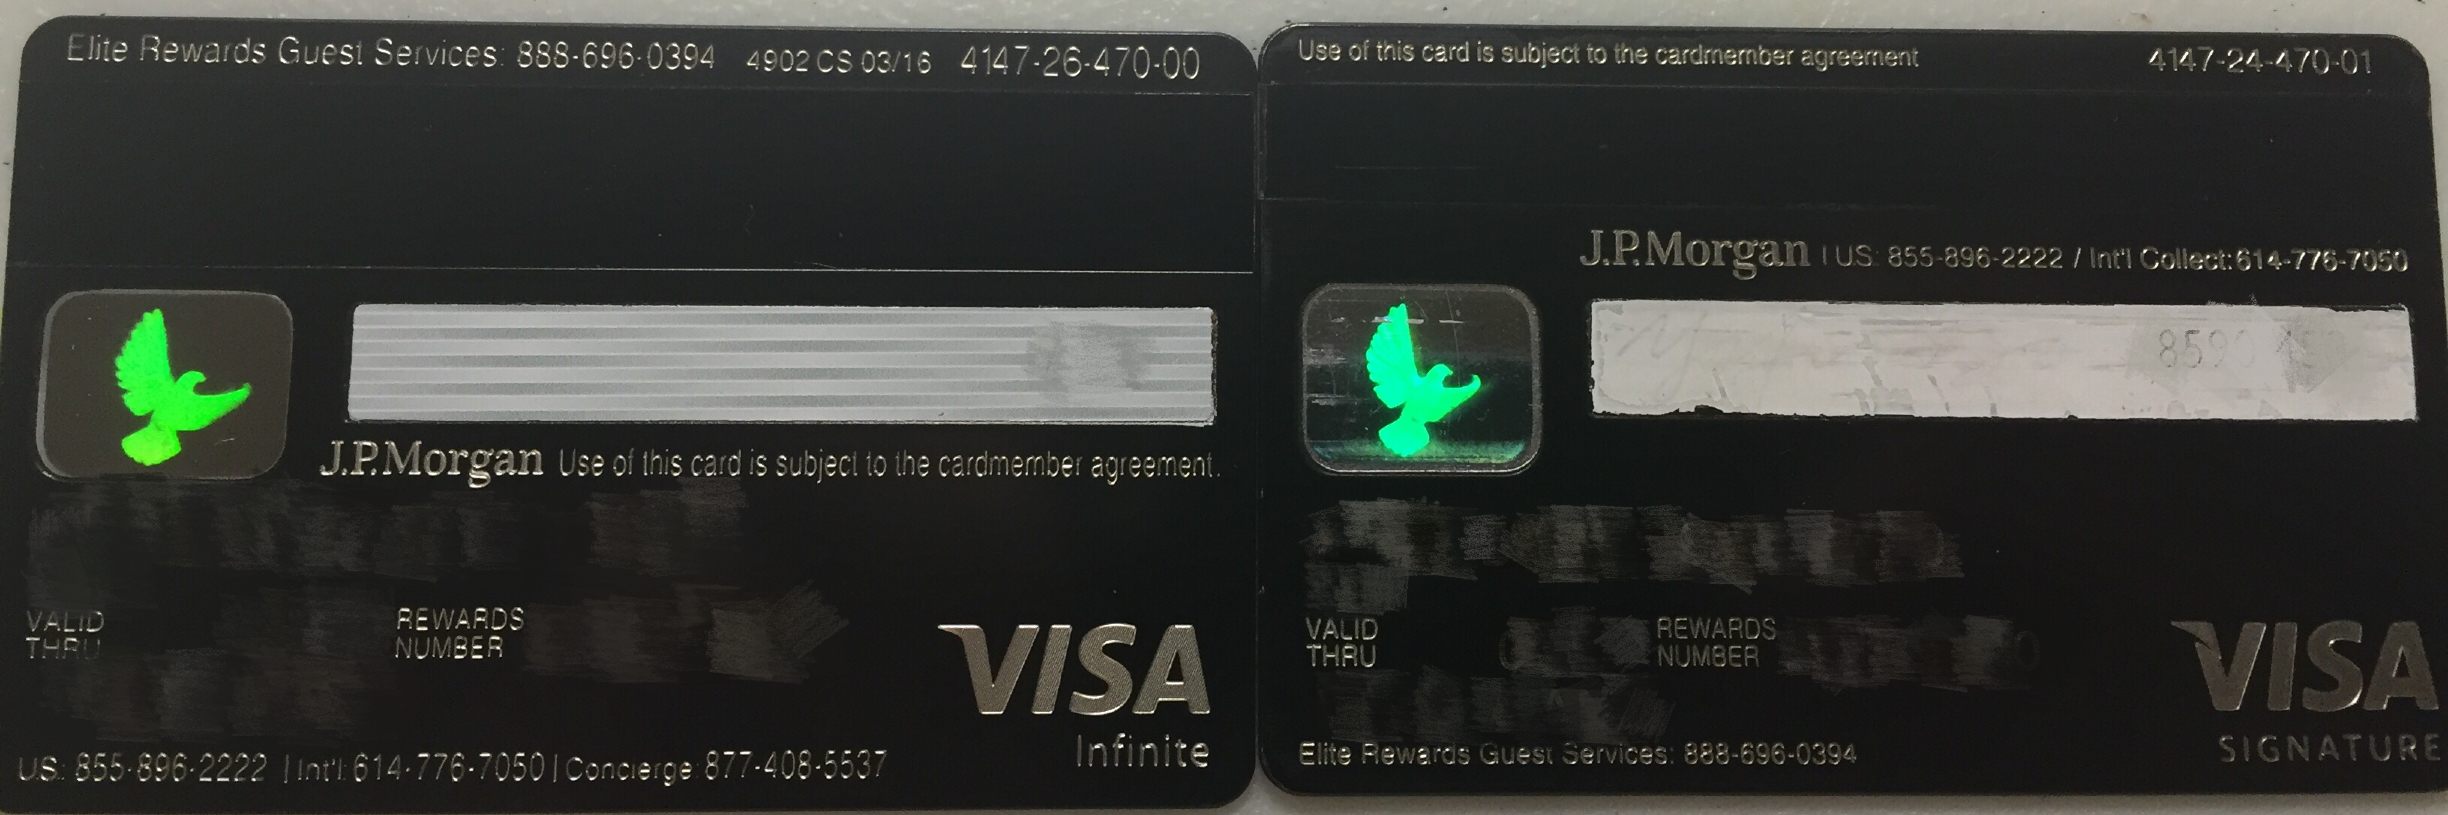 ritz-card-old-and-new-back